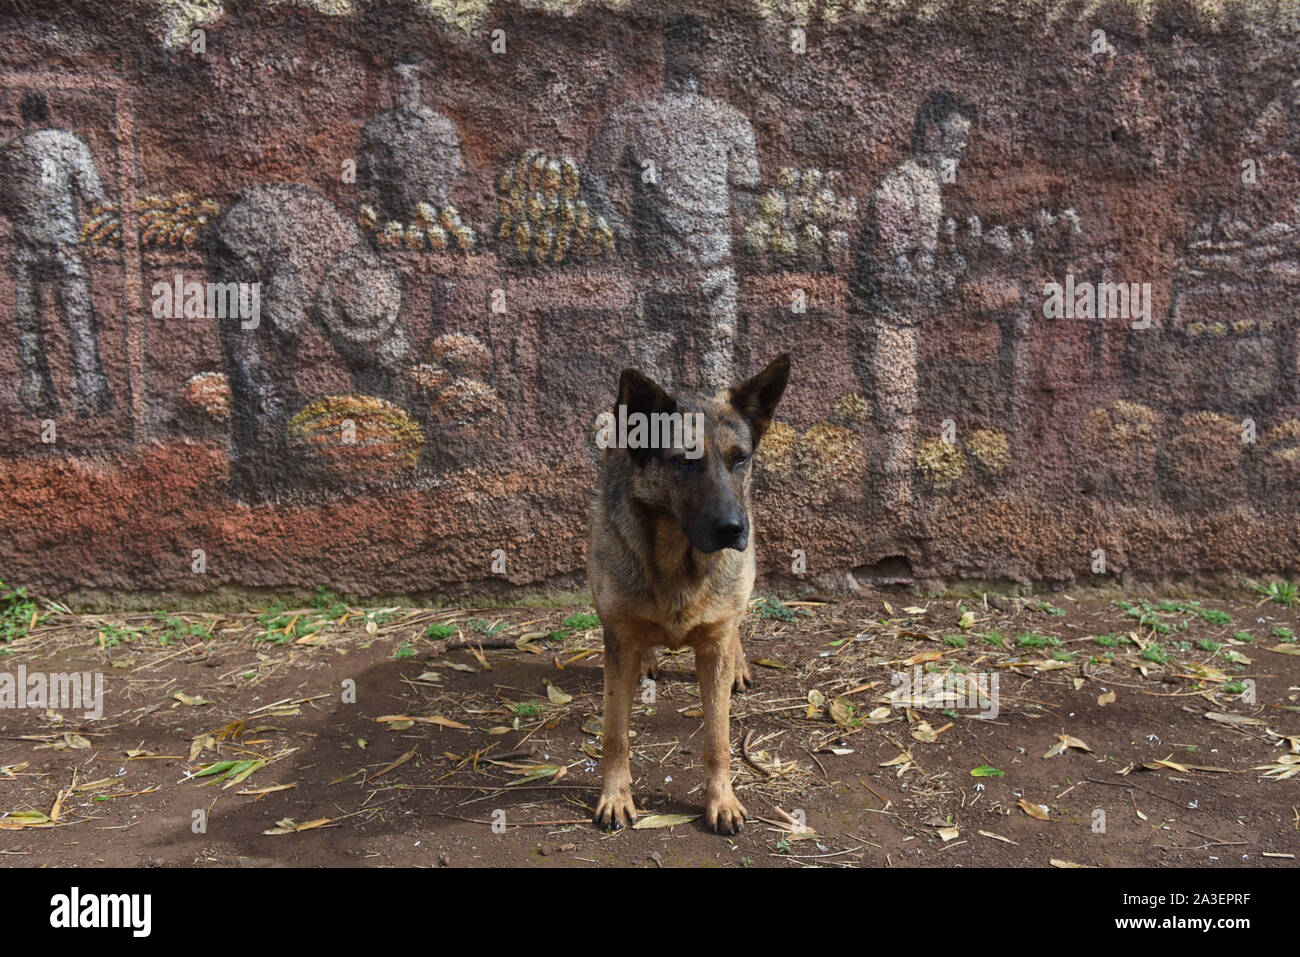 A dog is seen in front of a street art on a street in the center of the village.Hanga Roa is the capital of Easter Island, a Chilean island in the southeastern Pacific Ocean. The village has around 5,000 inhabitants, which comprises between 87 and 90 percent of the total population of the island. Excluding a small percentage still engaged in traditional fishing and small-scale farming, the majority of the population is engaged in tourism which is the main source of income. Stock Photo